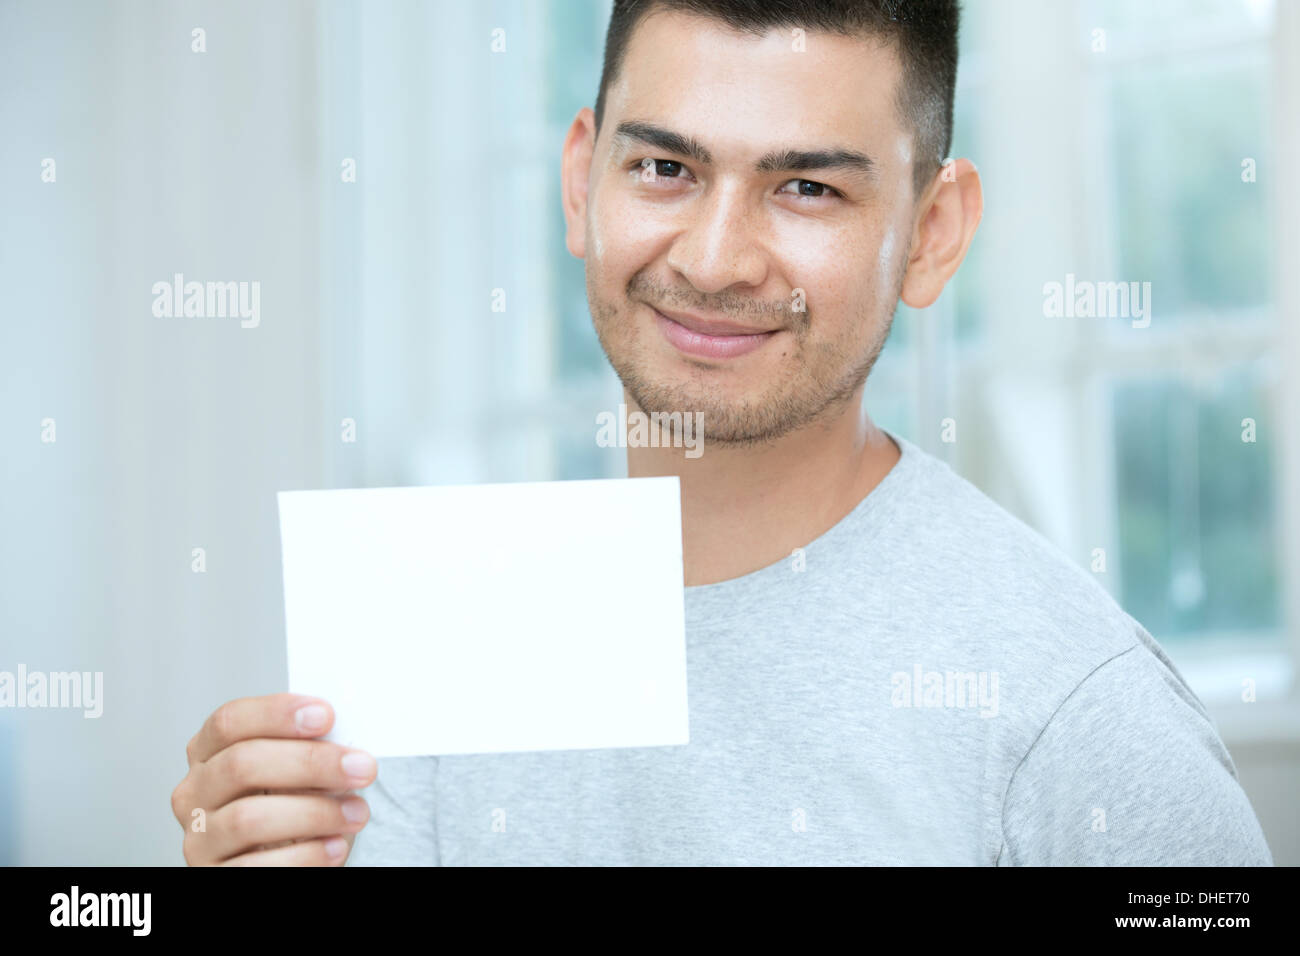 Mid adult man holding a blank card Stock Photo